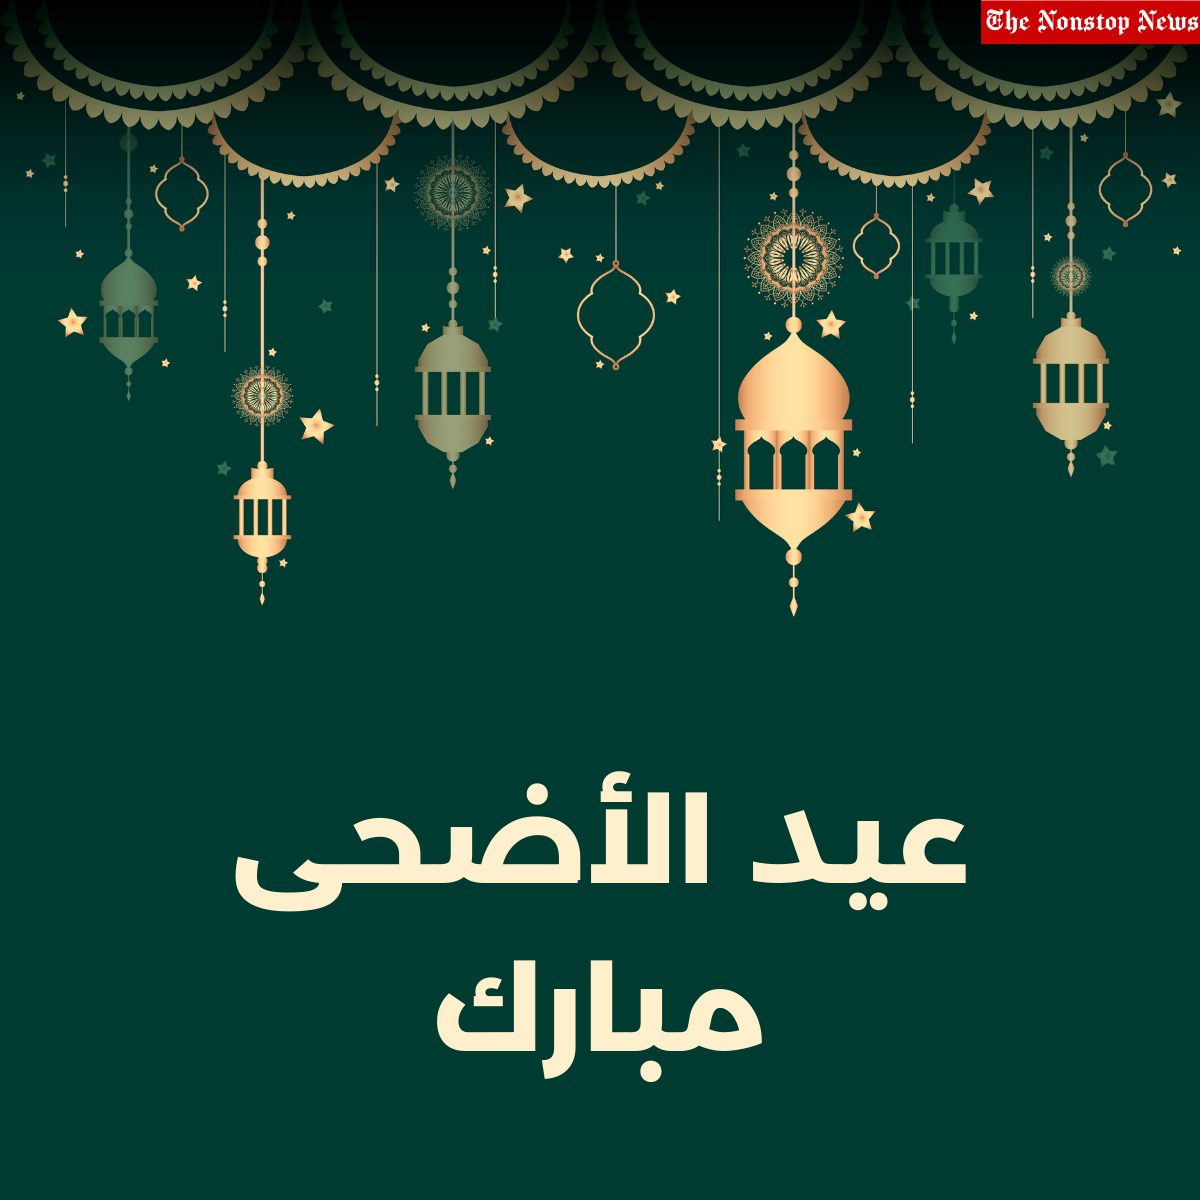 Eid Al-Adha Mubarak 2022: Arabic Quotes, Greetings, Images, Messages, Posters, DP, Shayari, Dua to greet your loved ones on 'Bakrid'